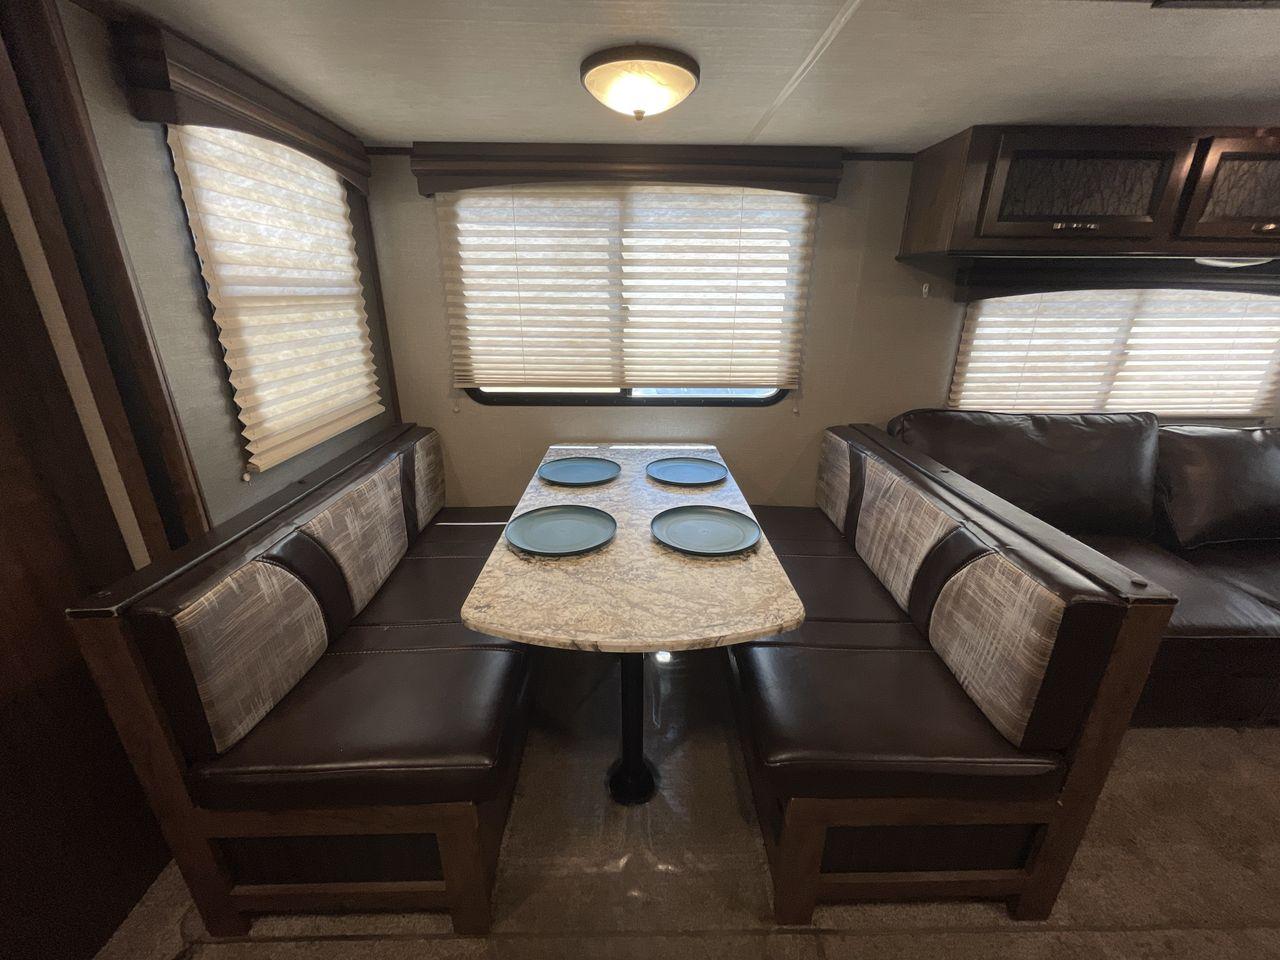 2018 CRUISER RADIANCE 28QD (5RXFB3324J2) , Length: 33.33 ft. | Dry Weight: 6,025 lbs. | Gross Weight: 9,600 lbs. | Slides: 1 transmission, located at 4319 N Main Street, Cleburne, TX, 76033, (817) 221-0660, 32.435829, -97.384178 - The 2018 Cruiser RV Radiance 28QD seamlessly blends style, comfort, and functionality to redefine your camping experience. Measuring 33 feet in length, this RV is designed for spacious and lightweight towing. The aluminum frame construction ensures durability while maintaining a manageable weight fo - Photo #14